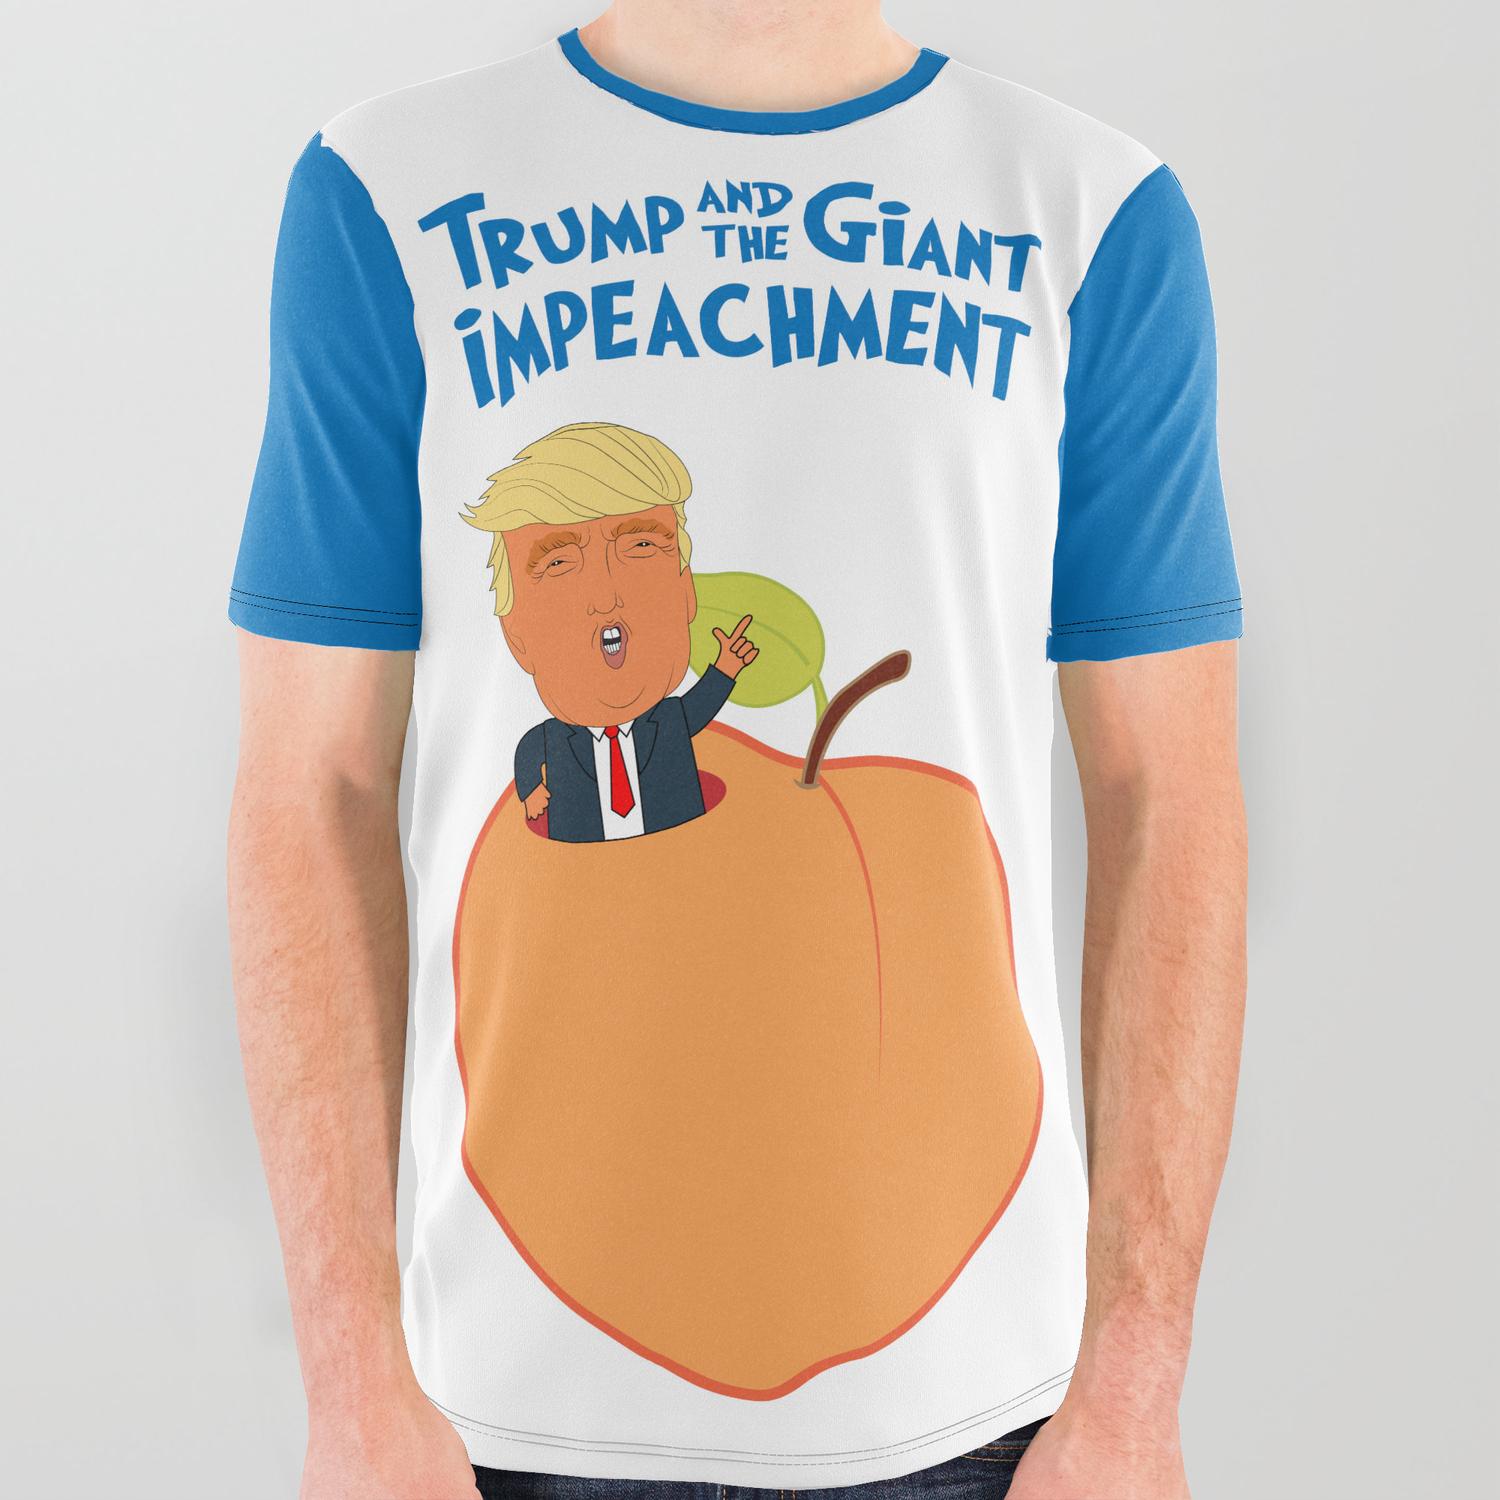 eskortere konto slack Trump and the Giant Impeachment All Over Graphic Tee by Gumless | Society6